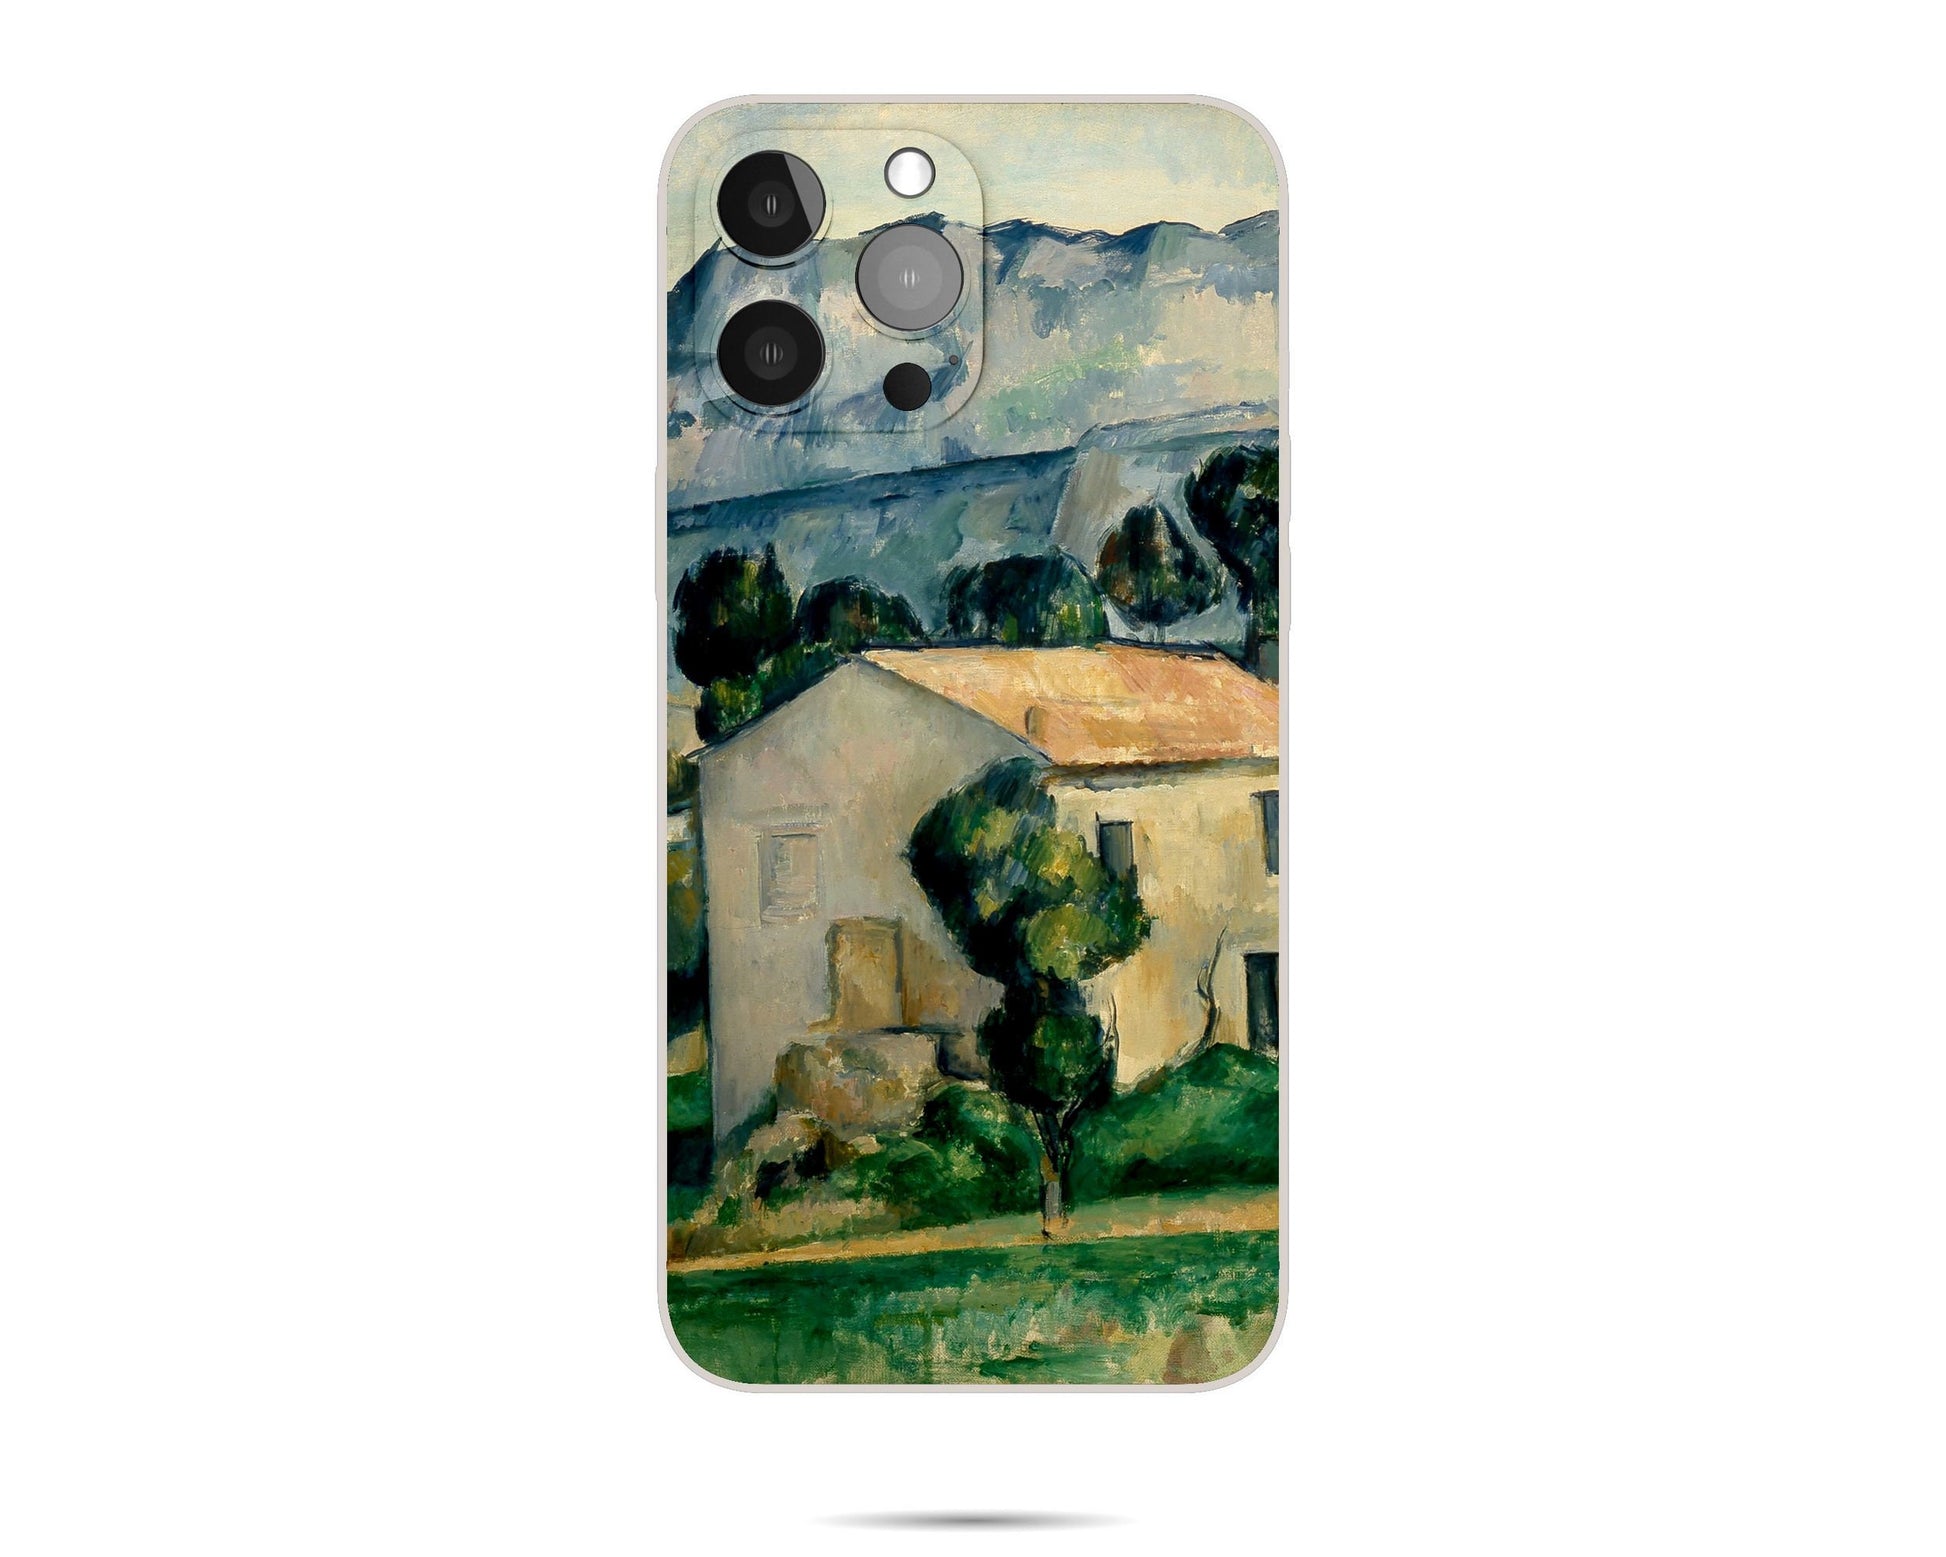 Iphone Case Of Paul Cézanne Famous Landscape Painting, Iphone 12 Pro Max, Iphone Xs Case, Post-Impressionist, Birthday Gift, Silicone Case